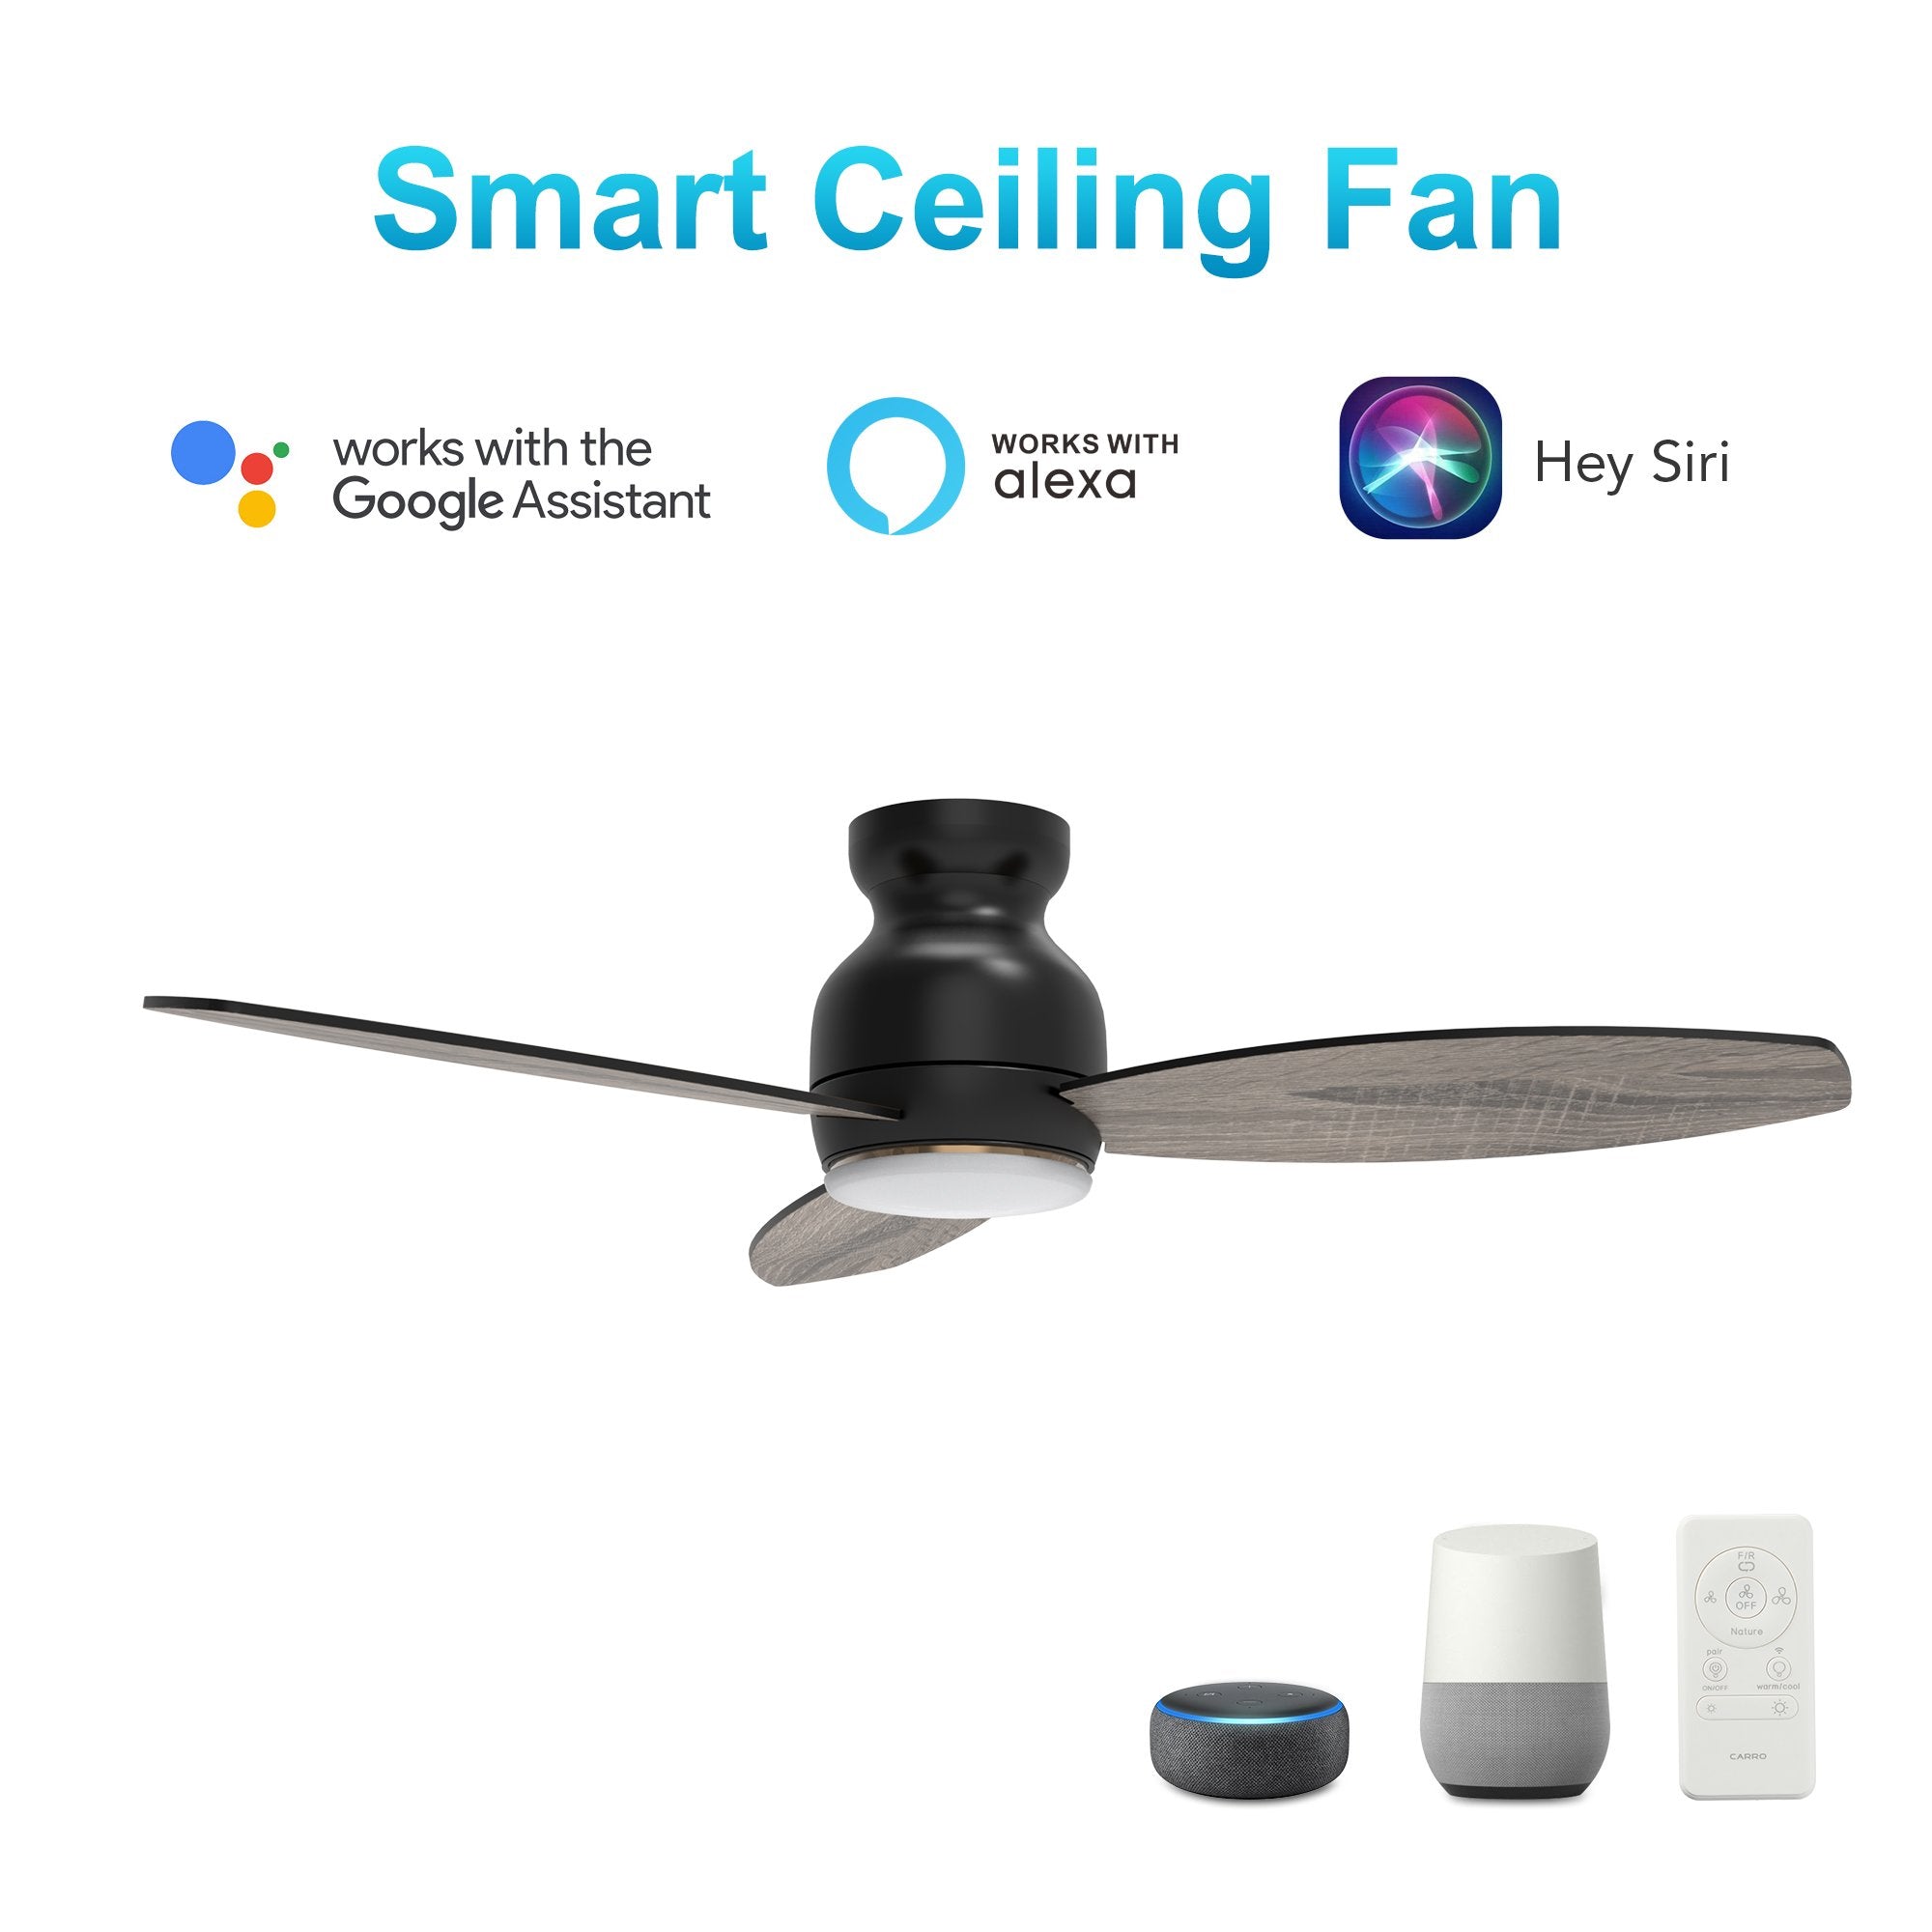 Trendsetter Black 3 Blade Smart Ceiling Fan with Dimmable LED Light Kit Works with Remote Control, Wi-Fi apps and Voice control via Google Assistant/Alexa/Siri